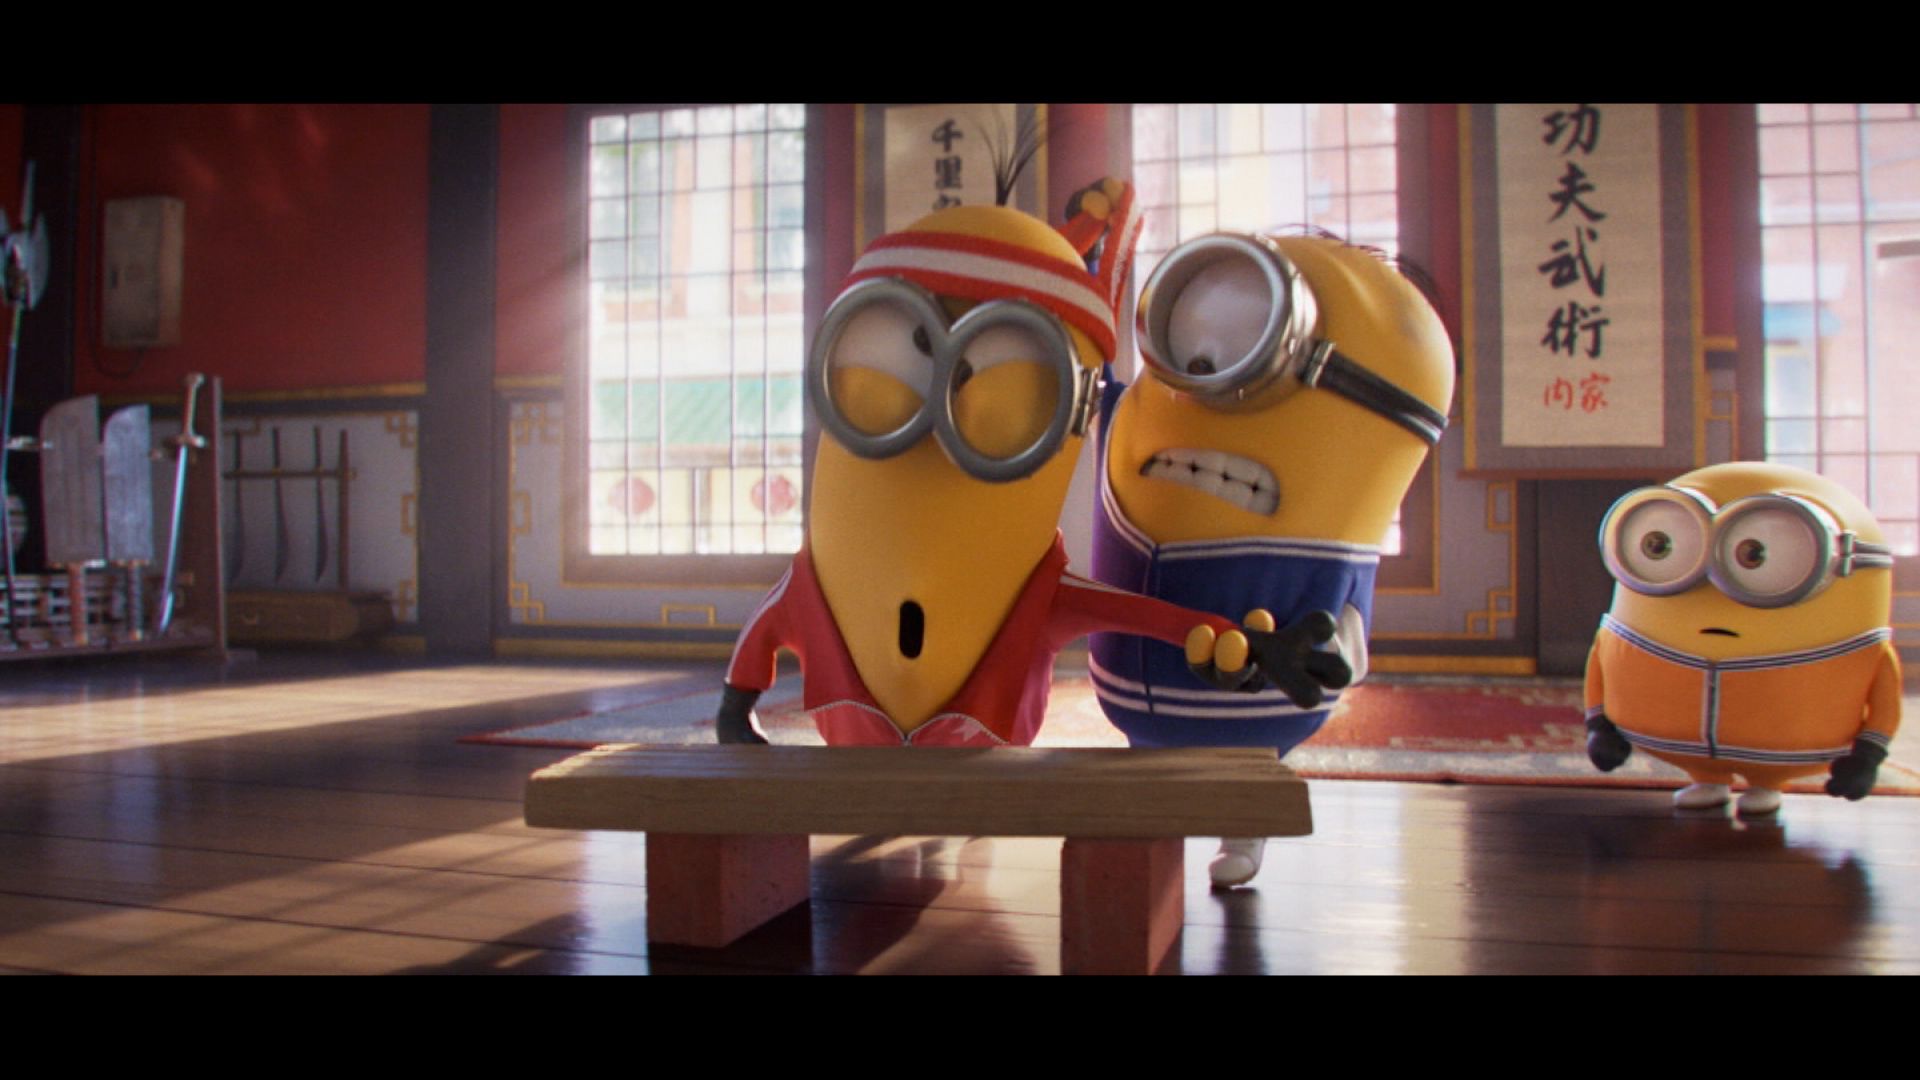 Hollywood Minute: The Minions try martial arts | CNN